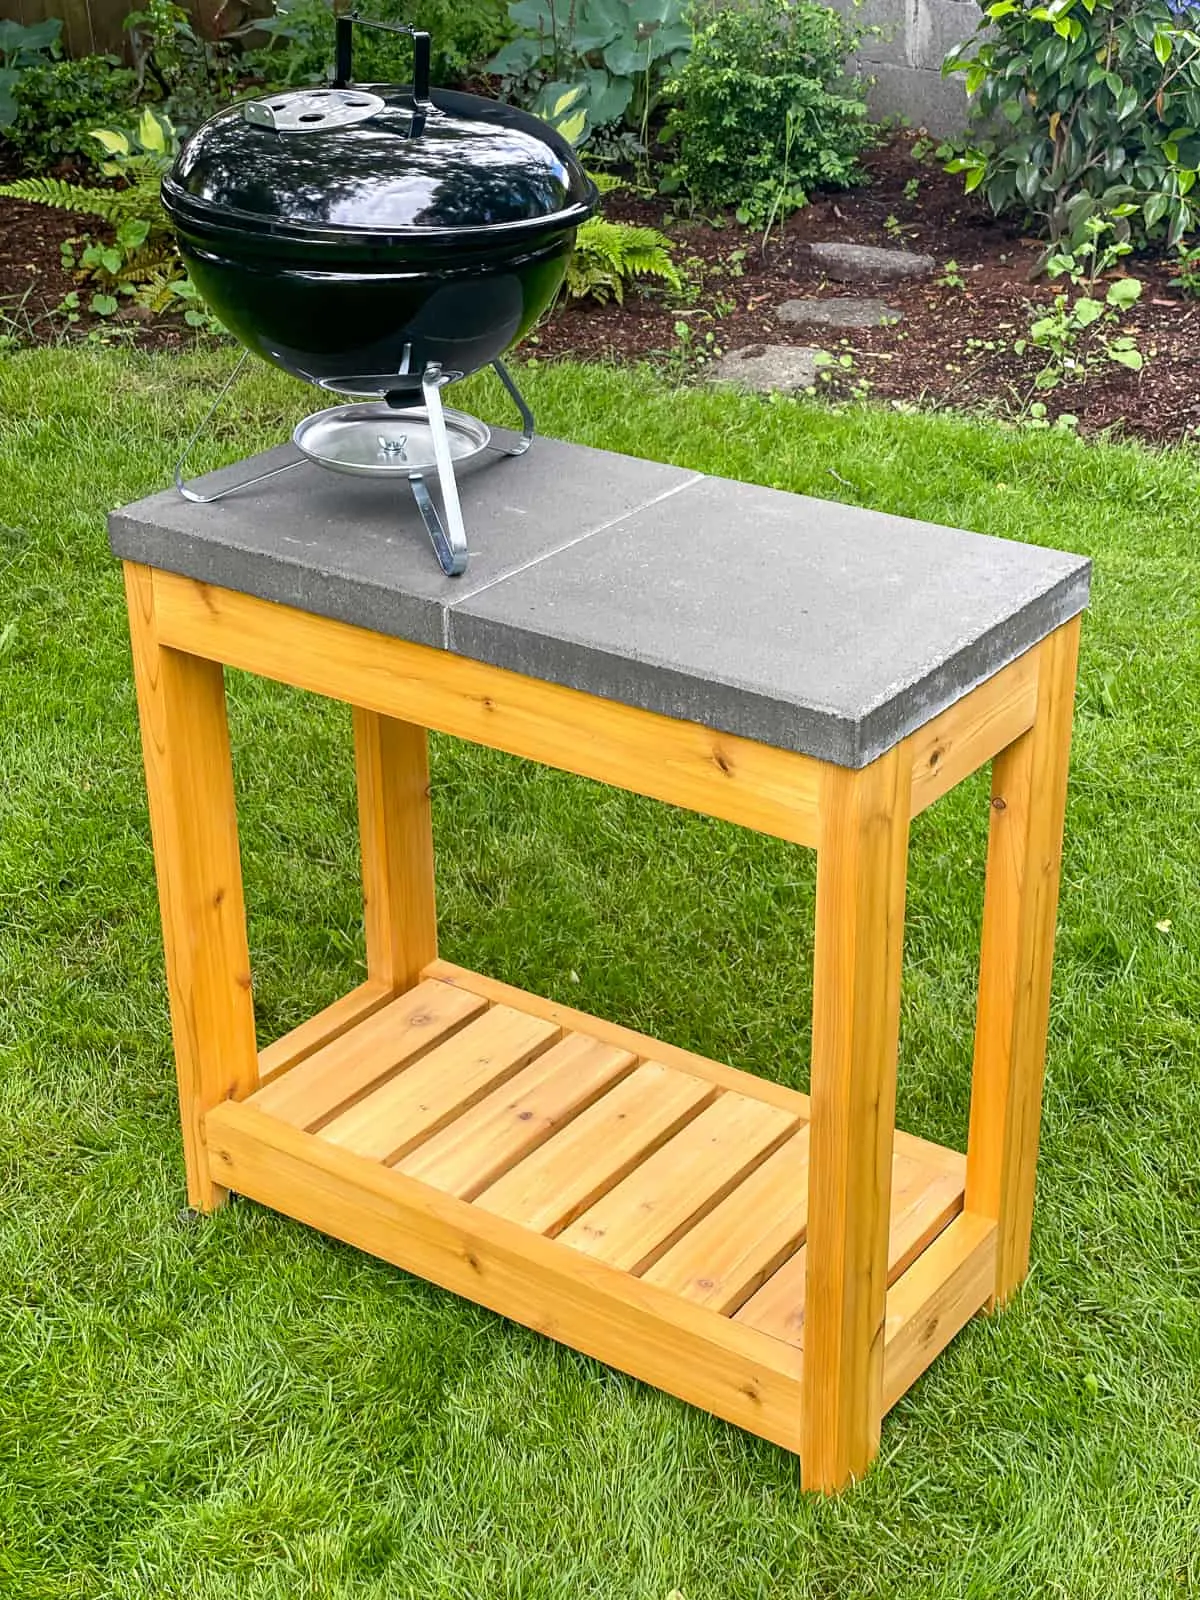 small charcoal grill on top of DIY grill station